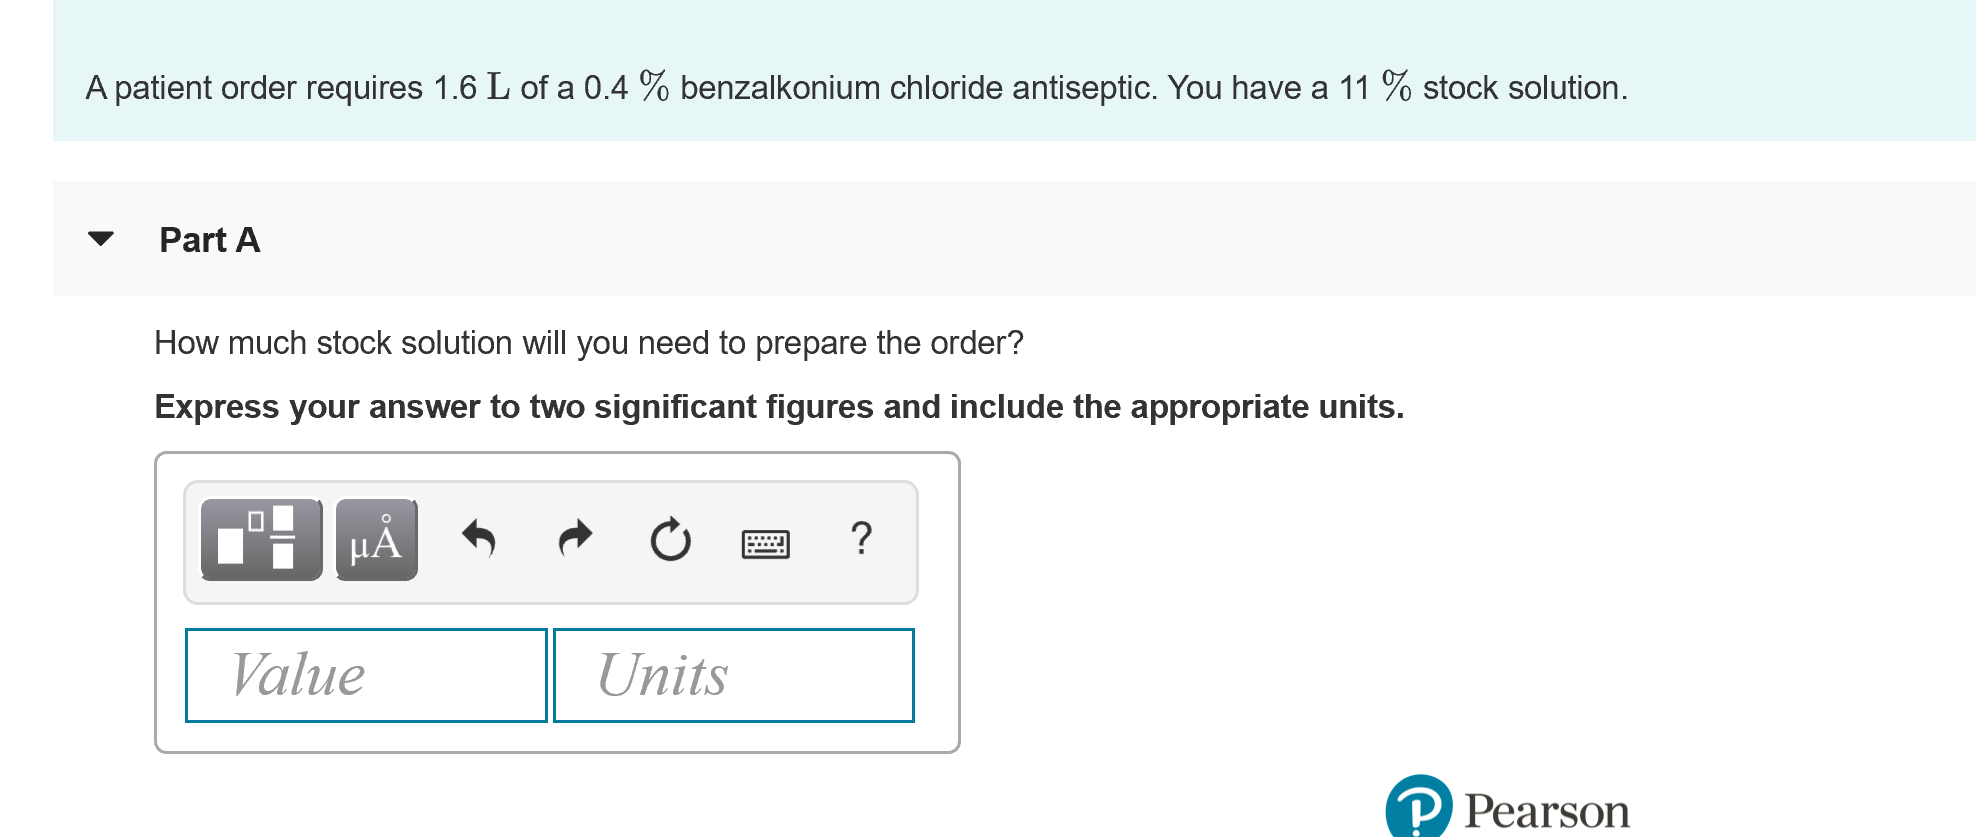 A patient order requires 1.6 L of a 0.4 % benzalkonium chloride antiseptic. You have a 11 % stock solution.
Part A
How much stock solution will you need to prepare the order?
Express your answer to two significant figures and include the appropriate units.
HA
Value
Units
P Pearson
